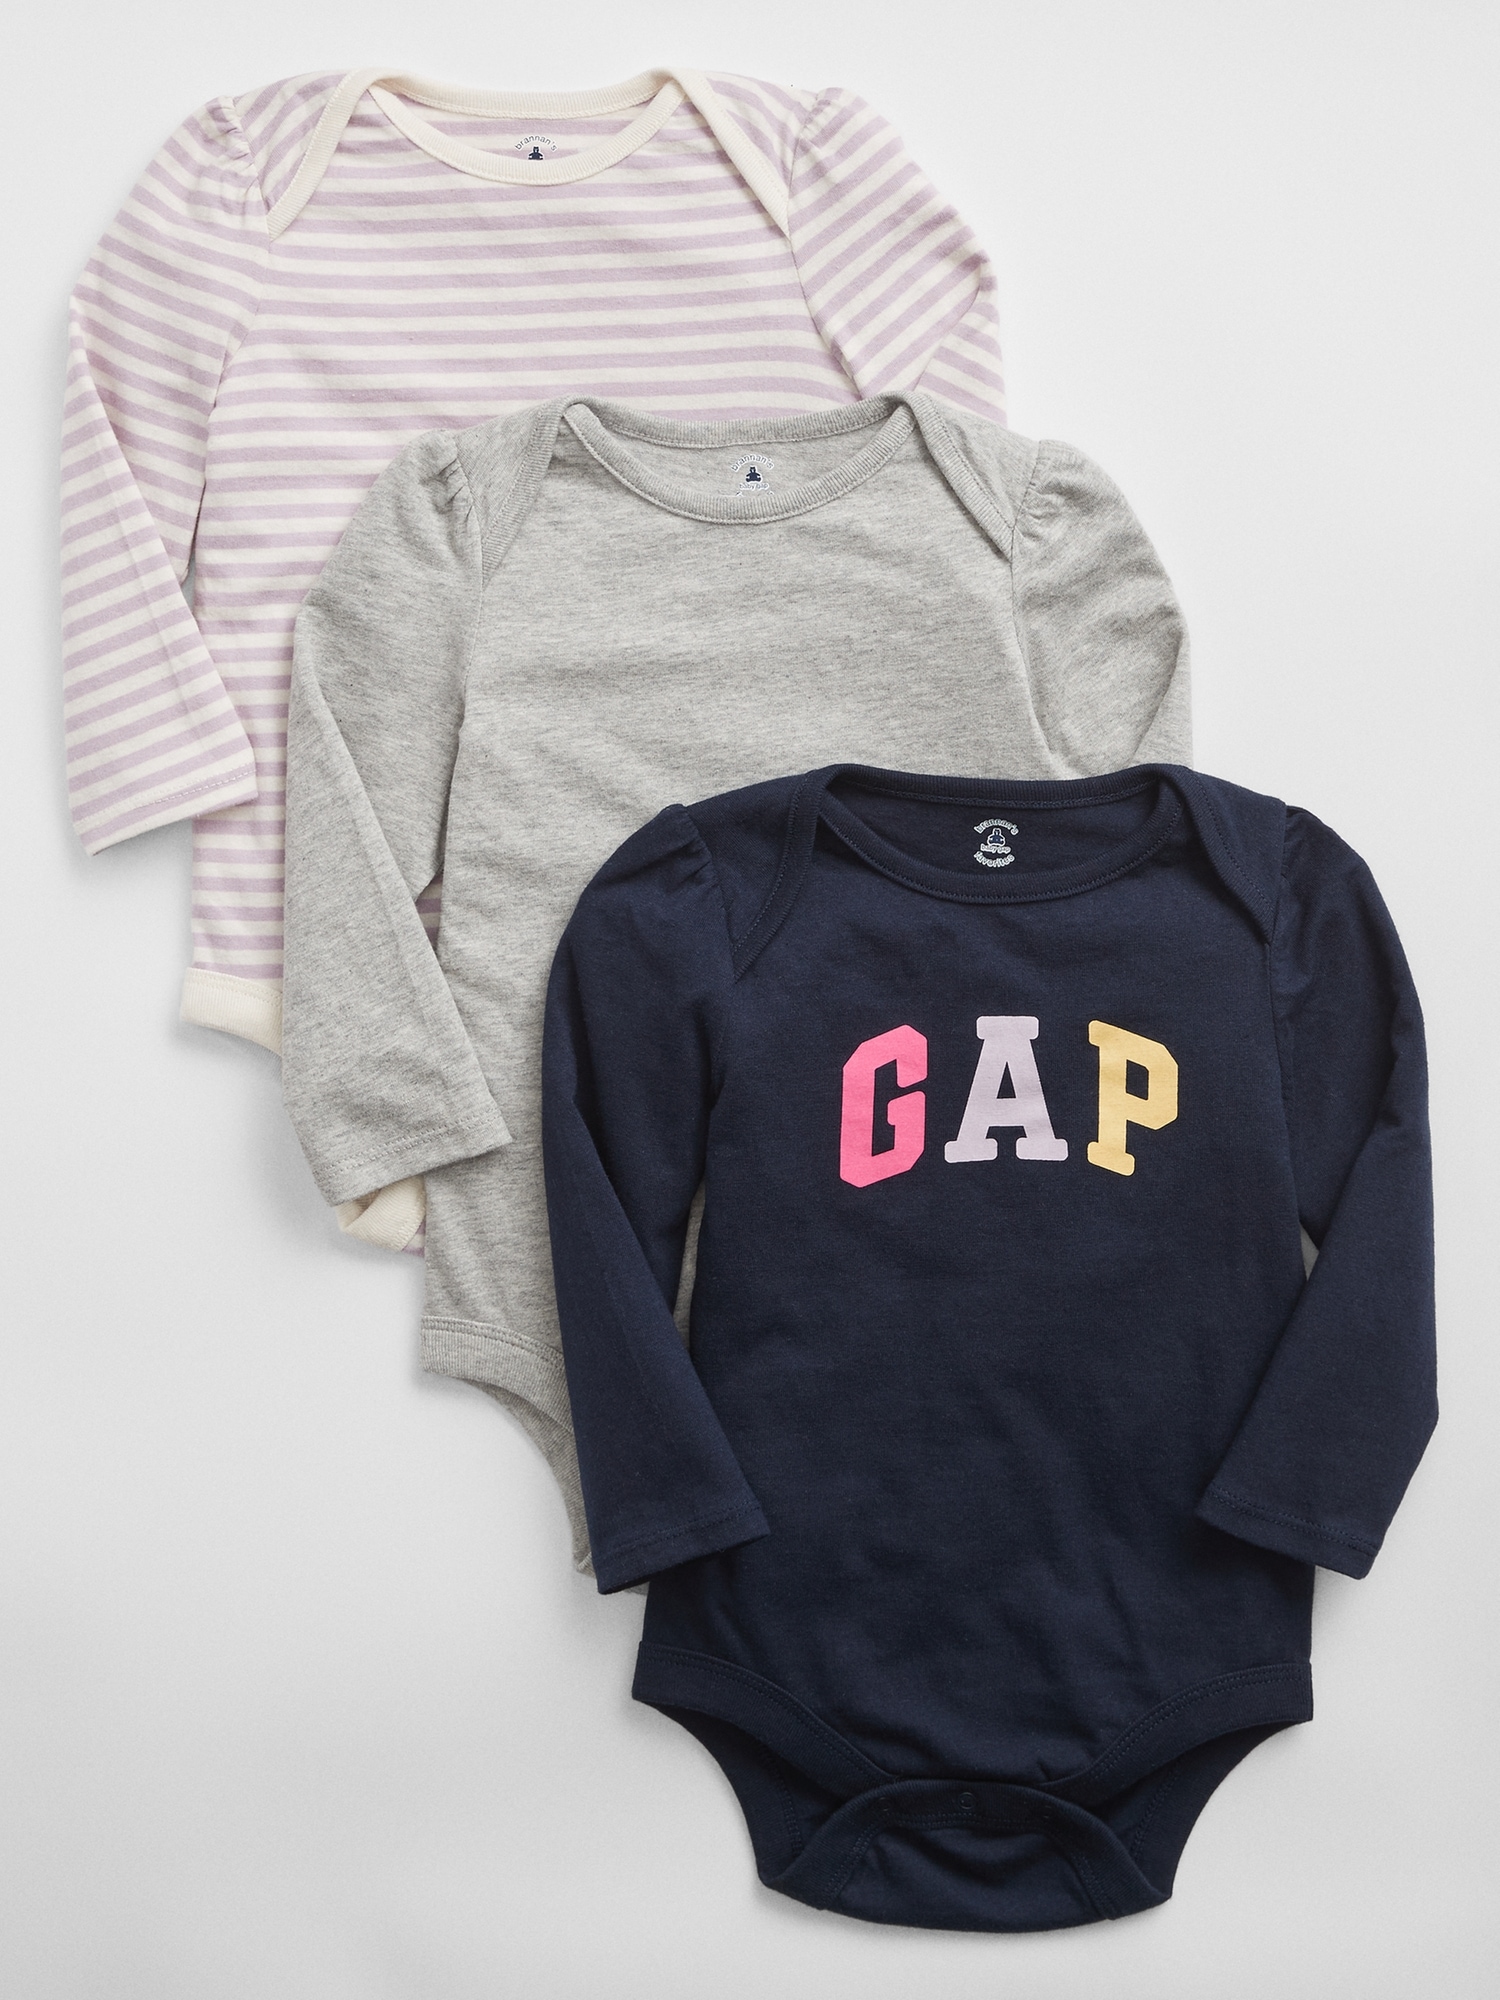 Gap Factory Clearance Sale: an Extra 65% off on Select Styles